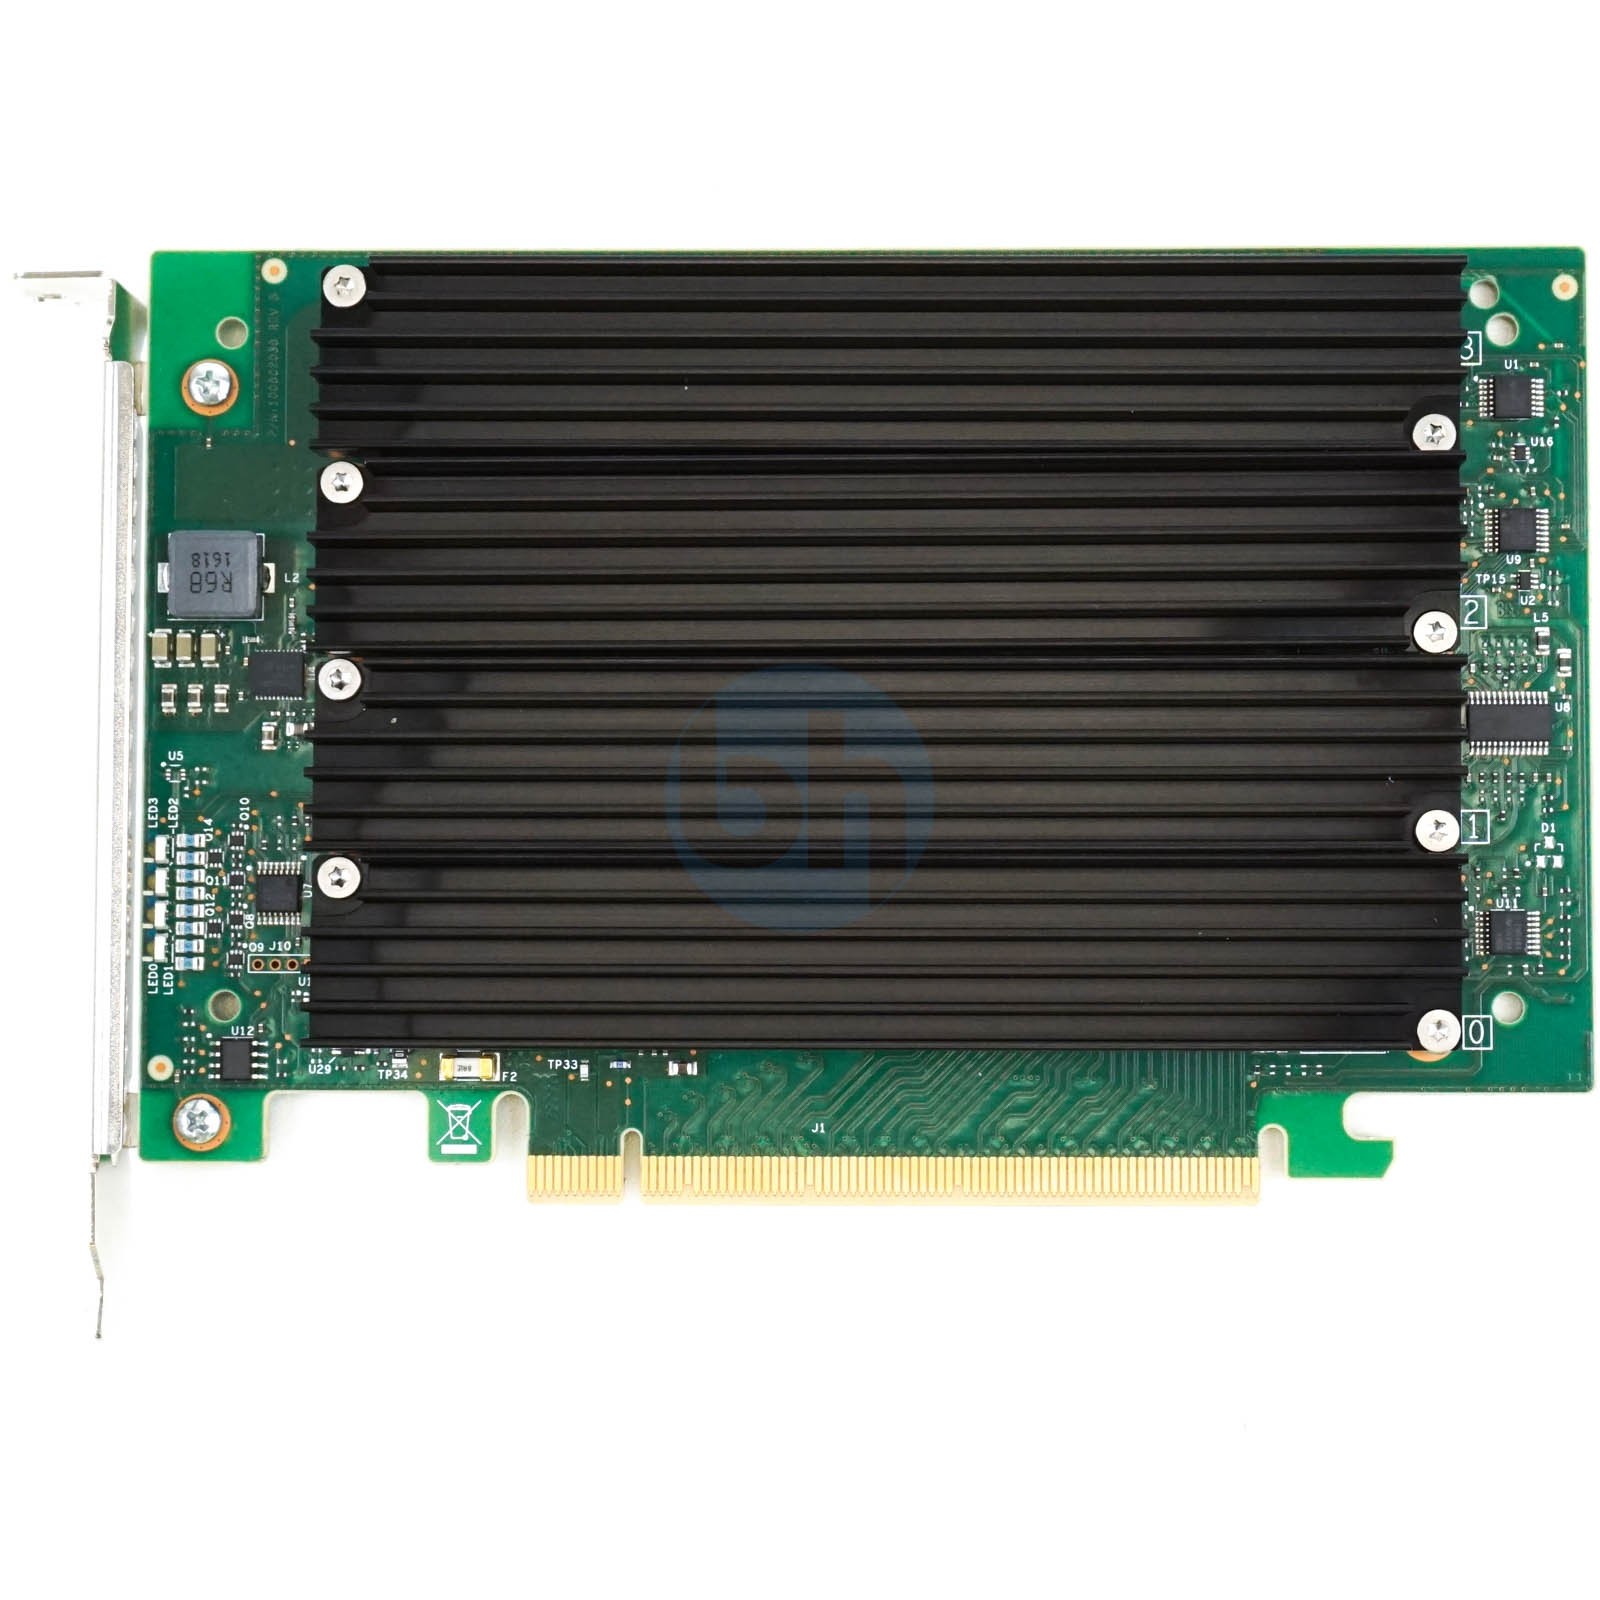 Dell Seagate Nytro XP7200 Quad NVMe M.2 - FH PCIe-x16 SSD Adapter